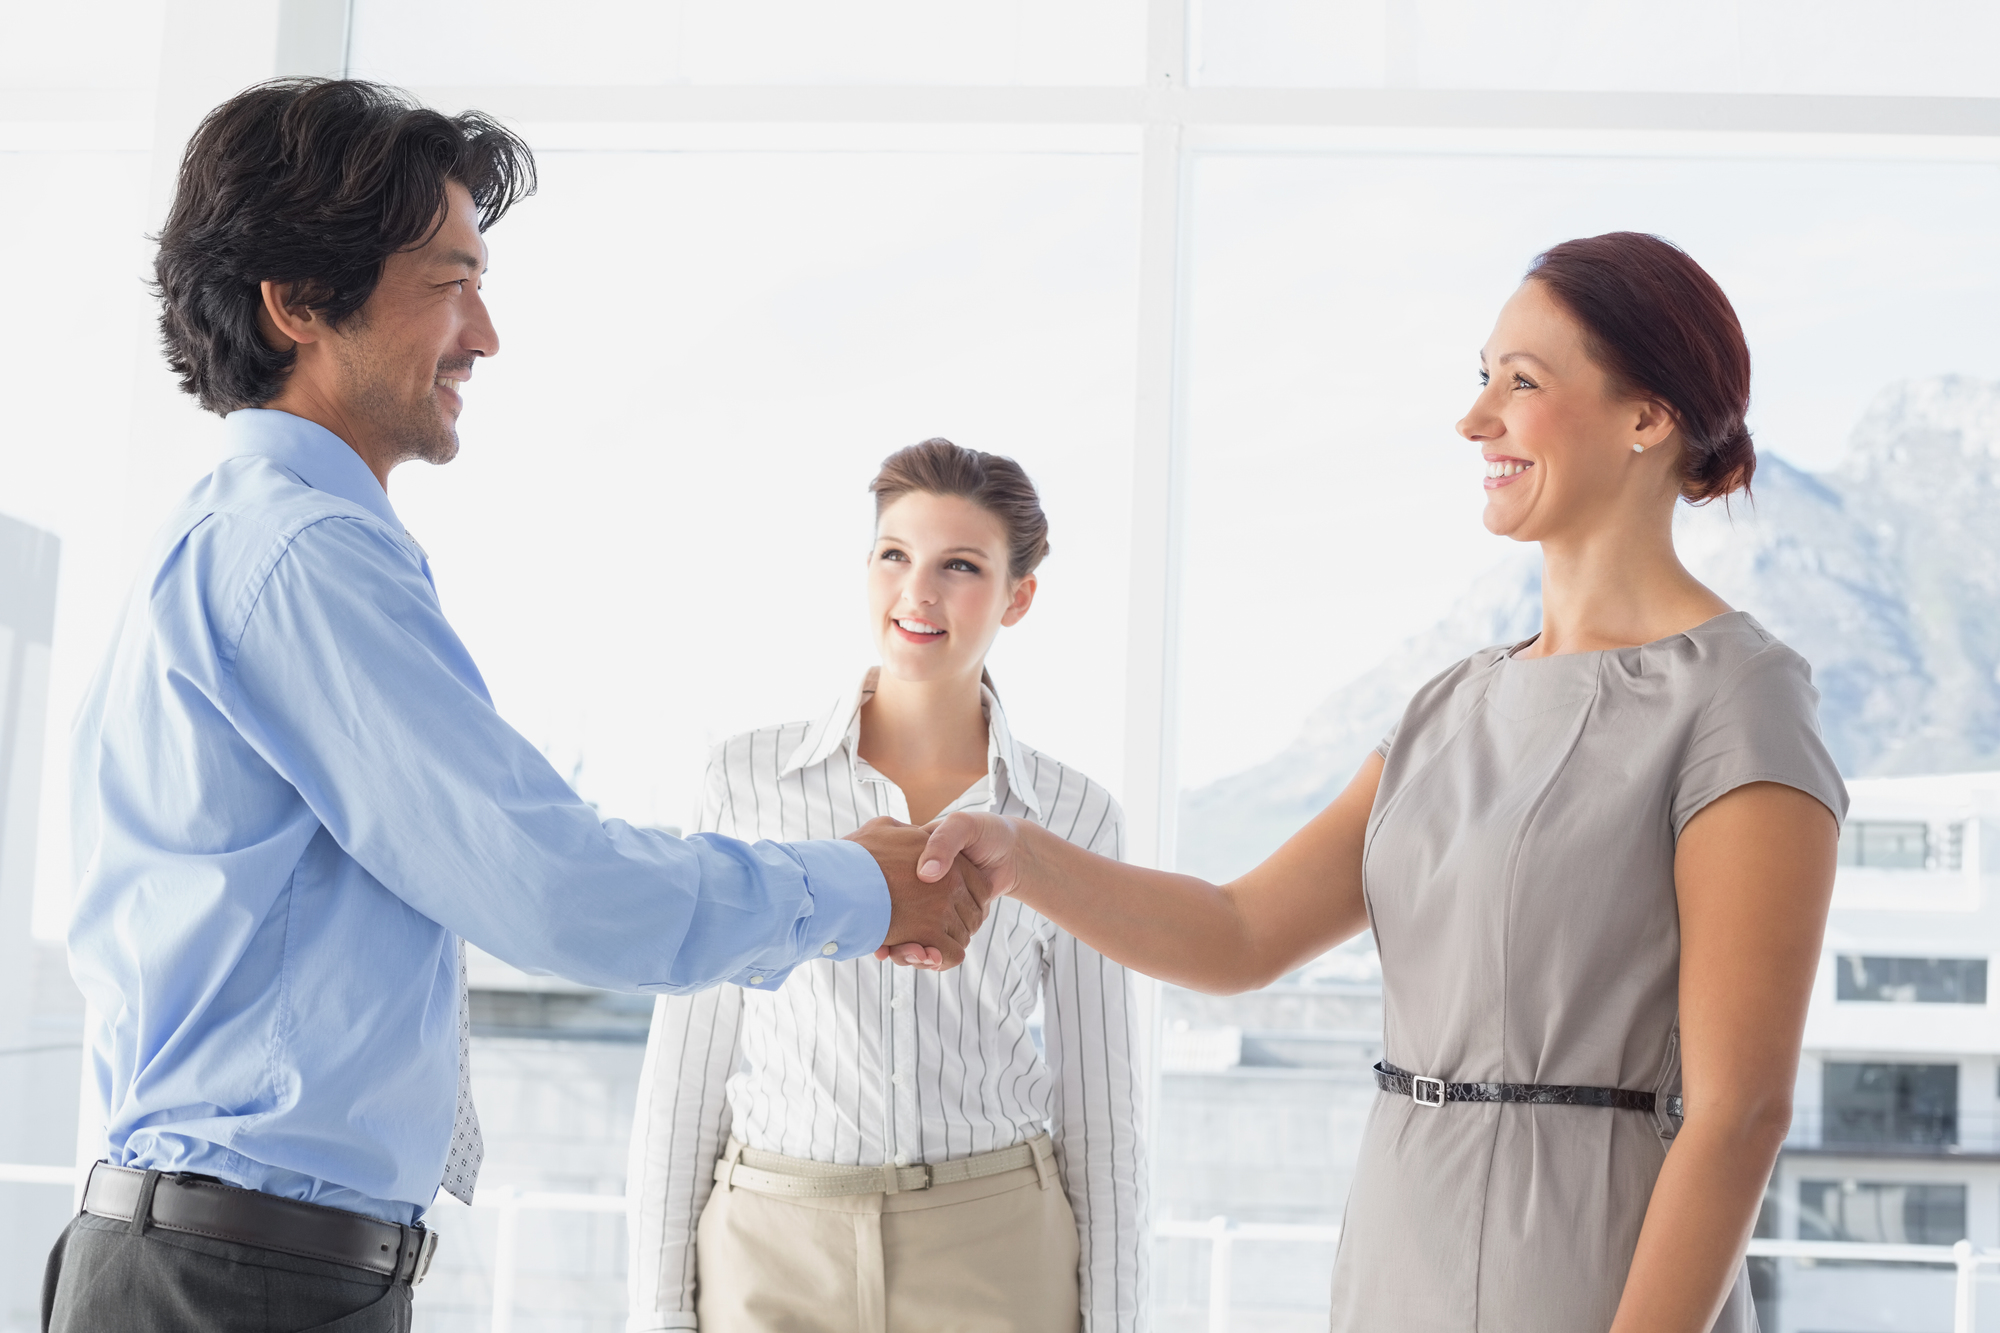 Business man shaking colleagues hand while smiling